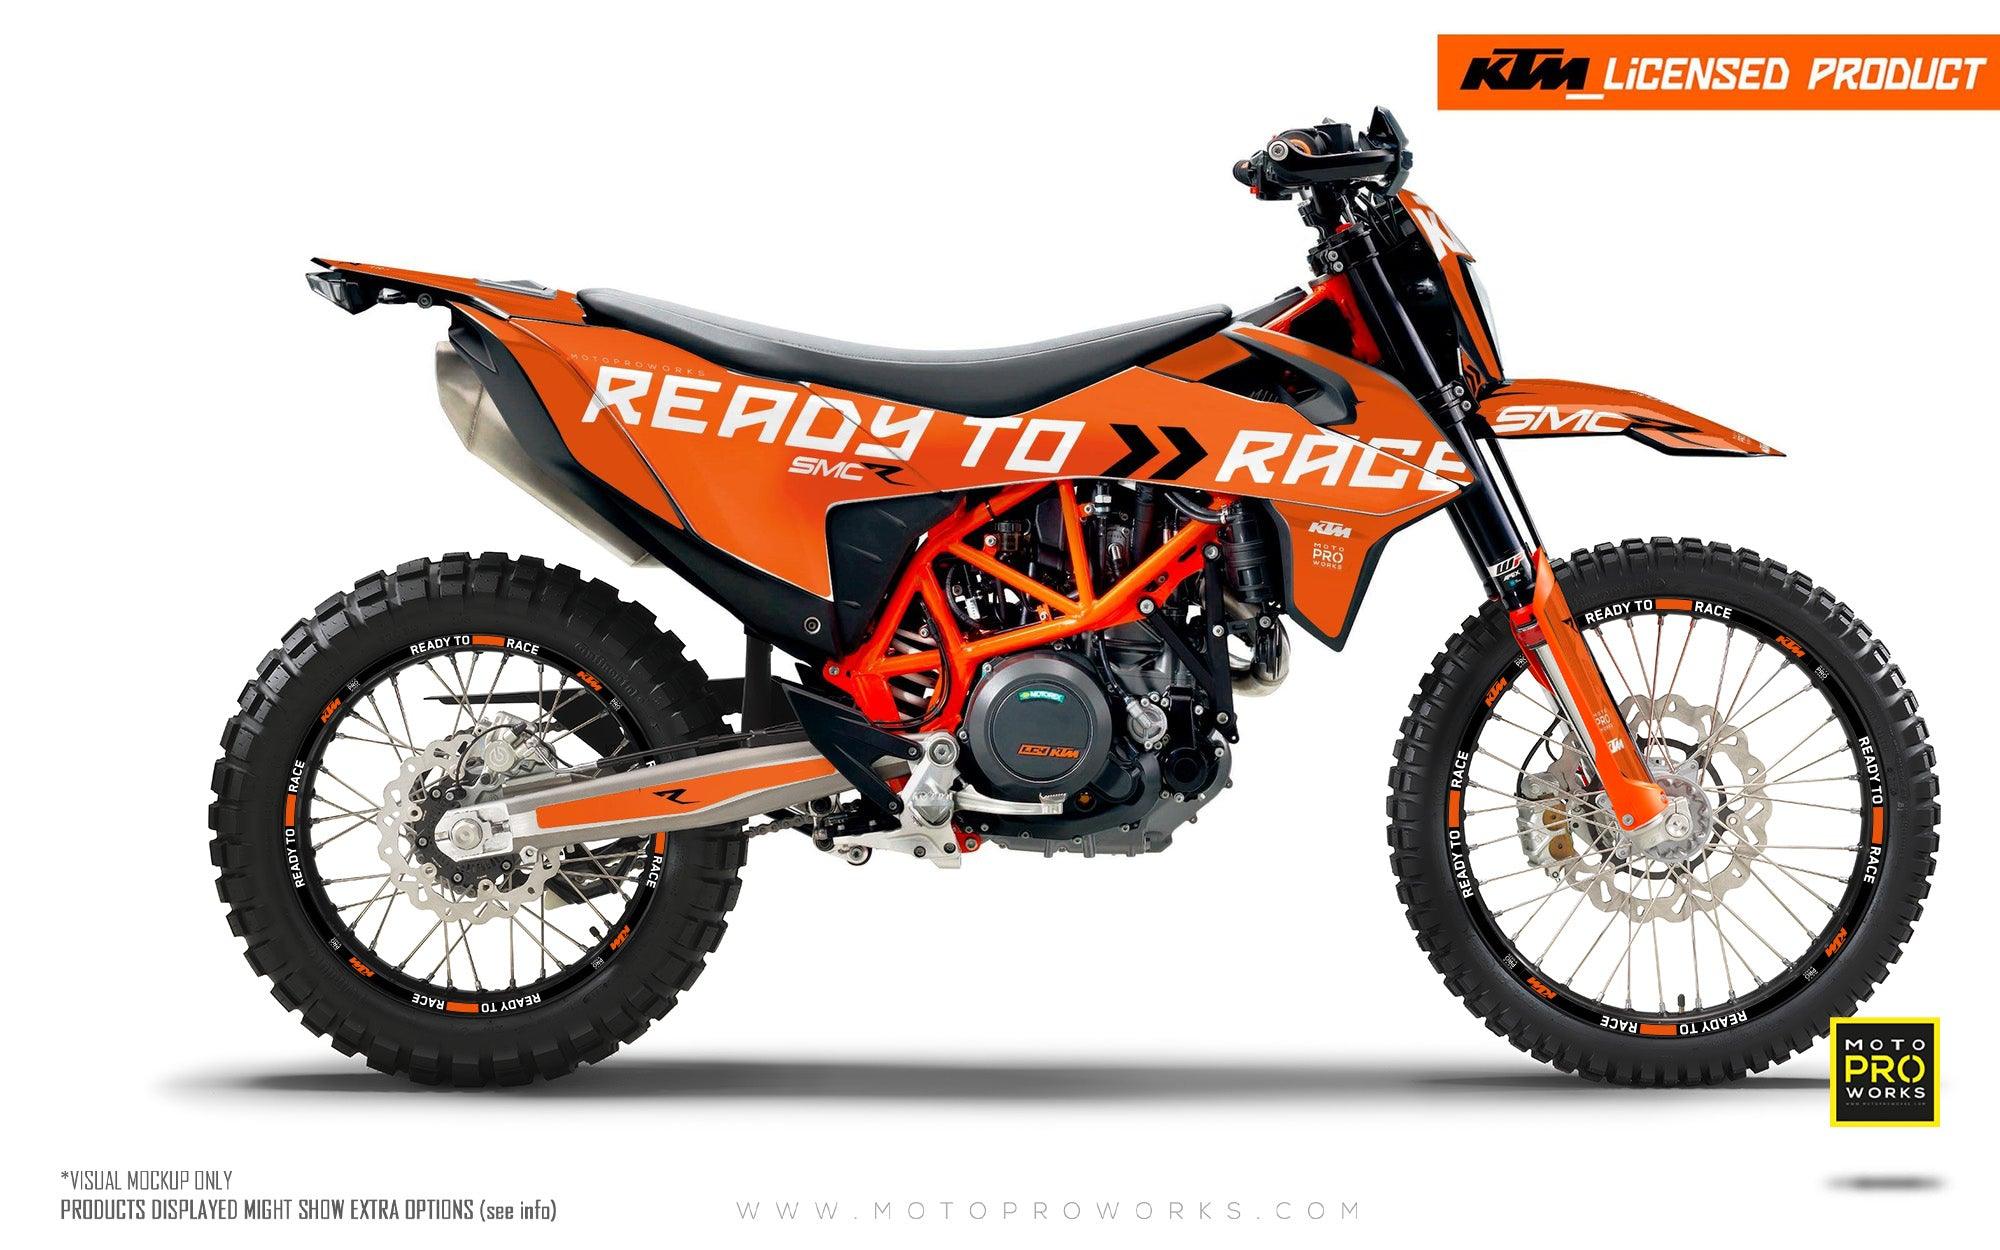 KTM GRAPHIC KIT - 690 SMC-R "Ready2Race" (Orange) - MotoProWorks | Decals and Bike Graphic kit